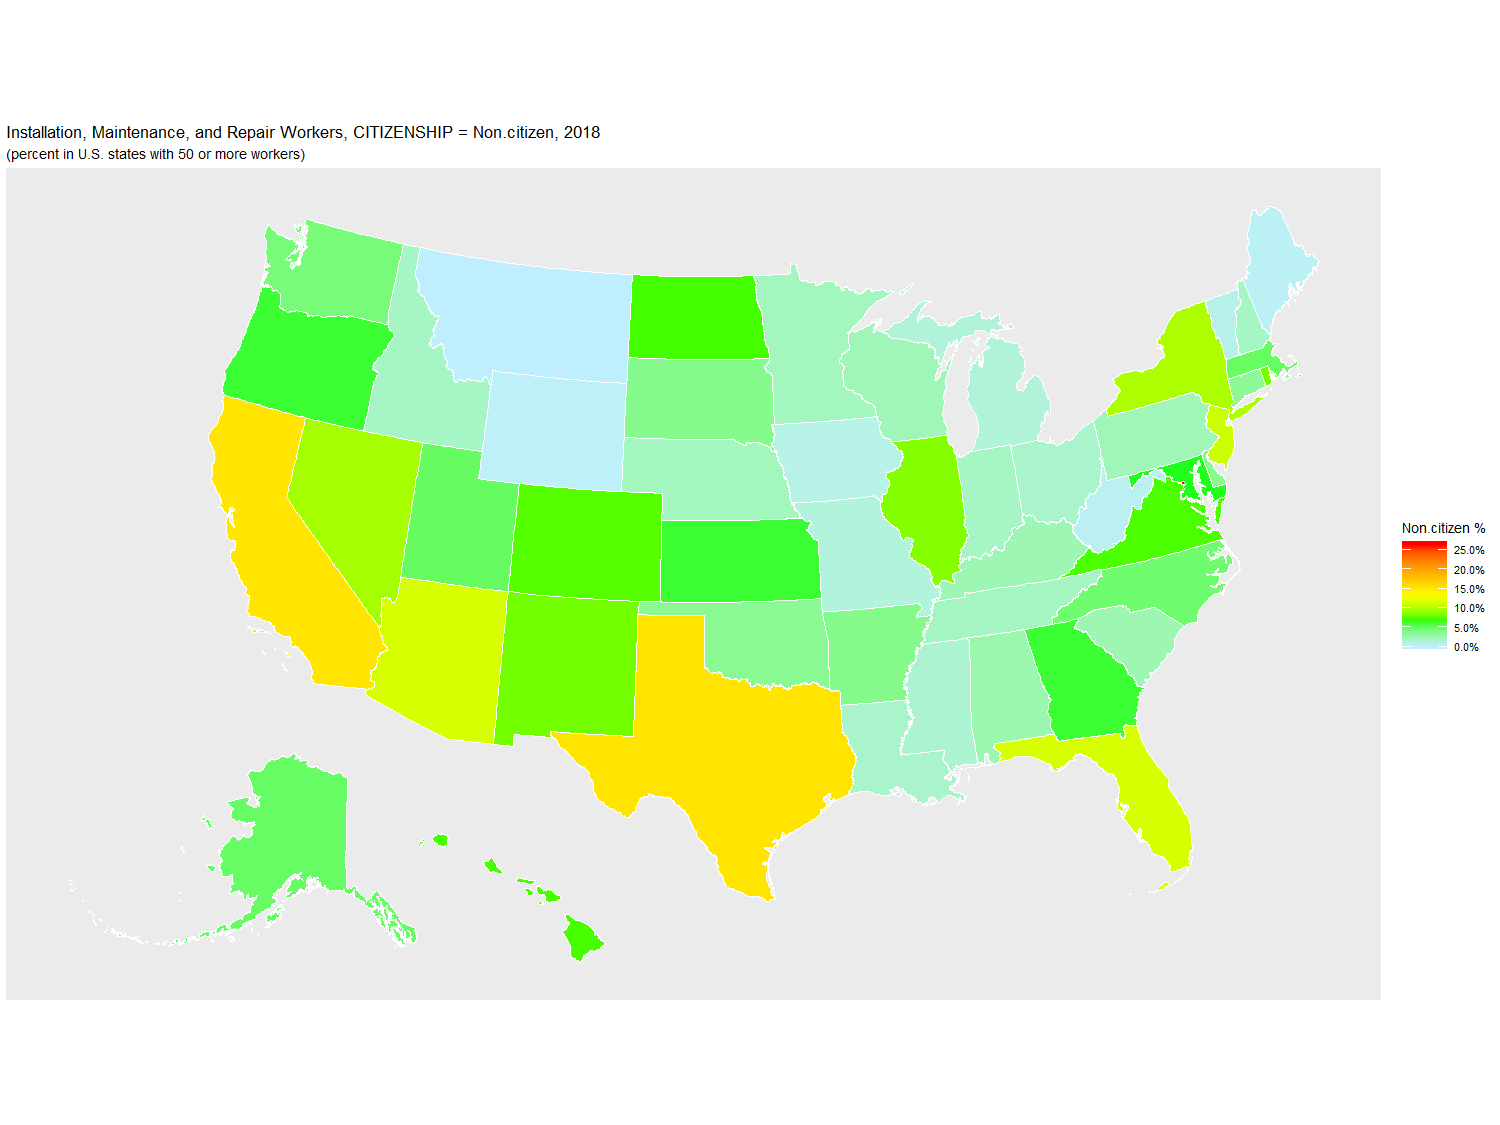 Non-citizen Percentage of Installation, Maintenance, and Repair Workers by U.S. State, 2018